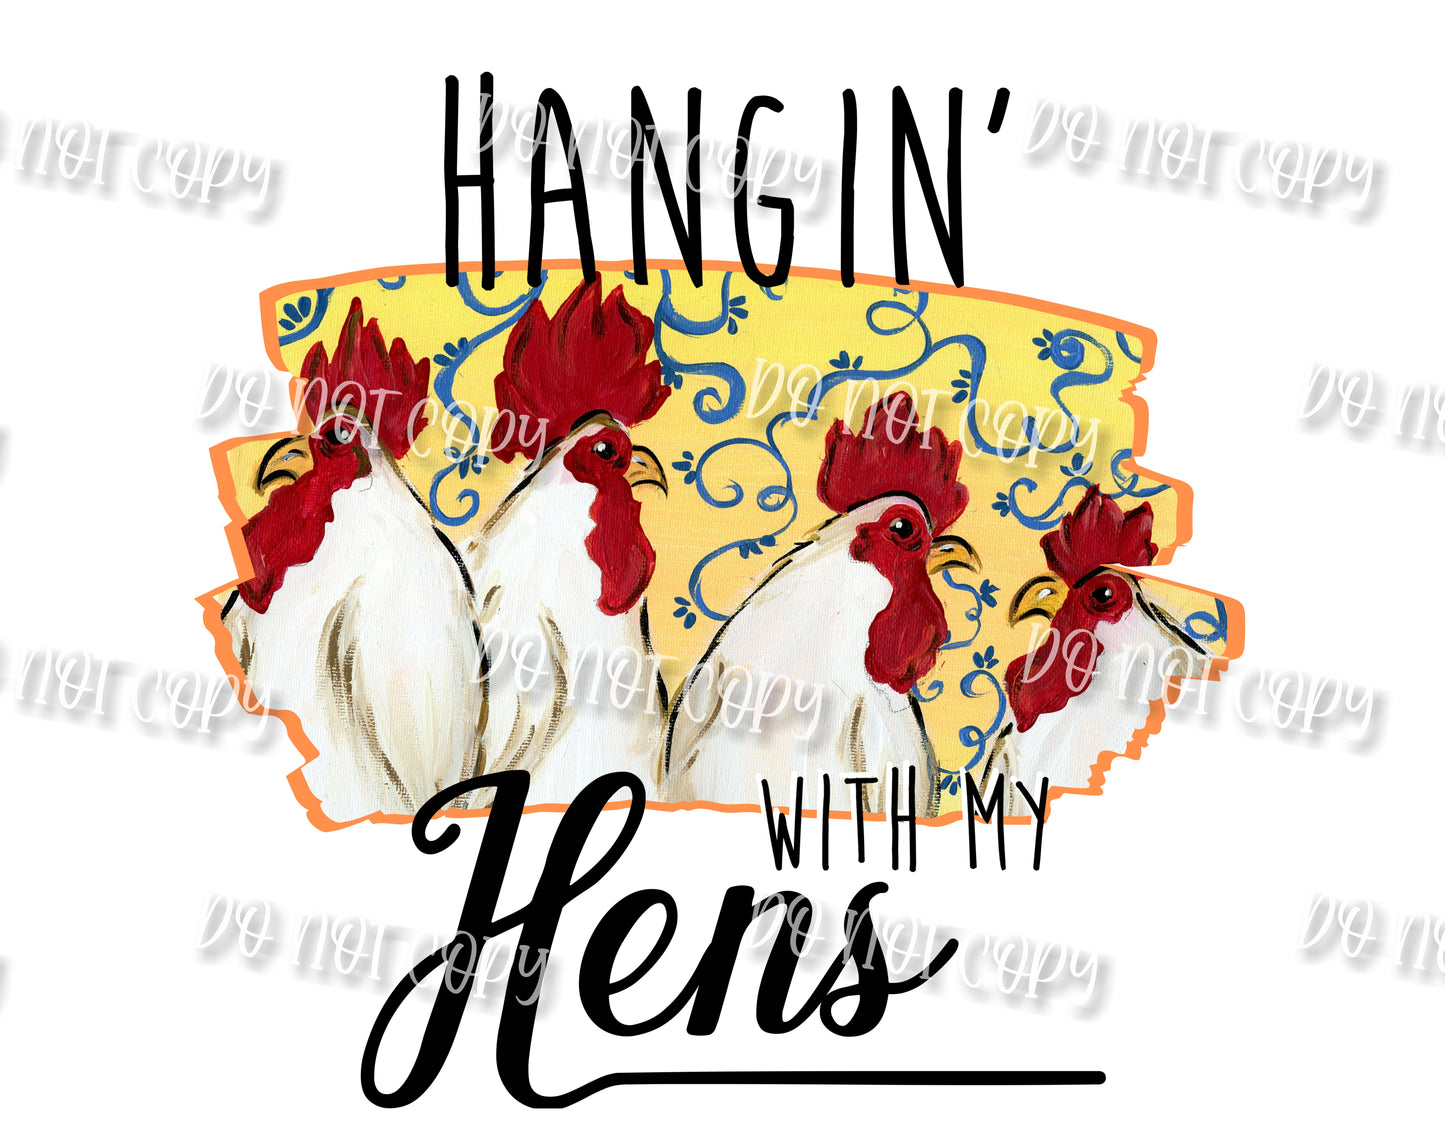 Hangin' with my hens